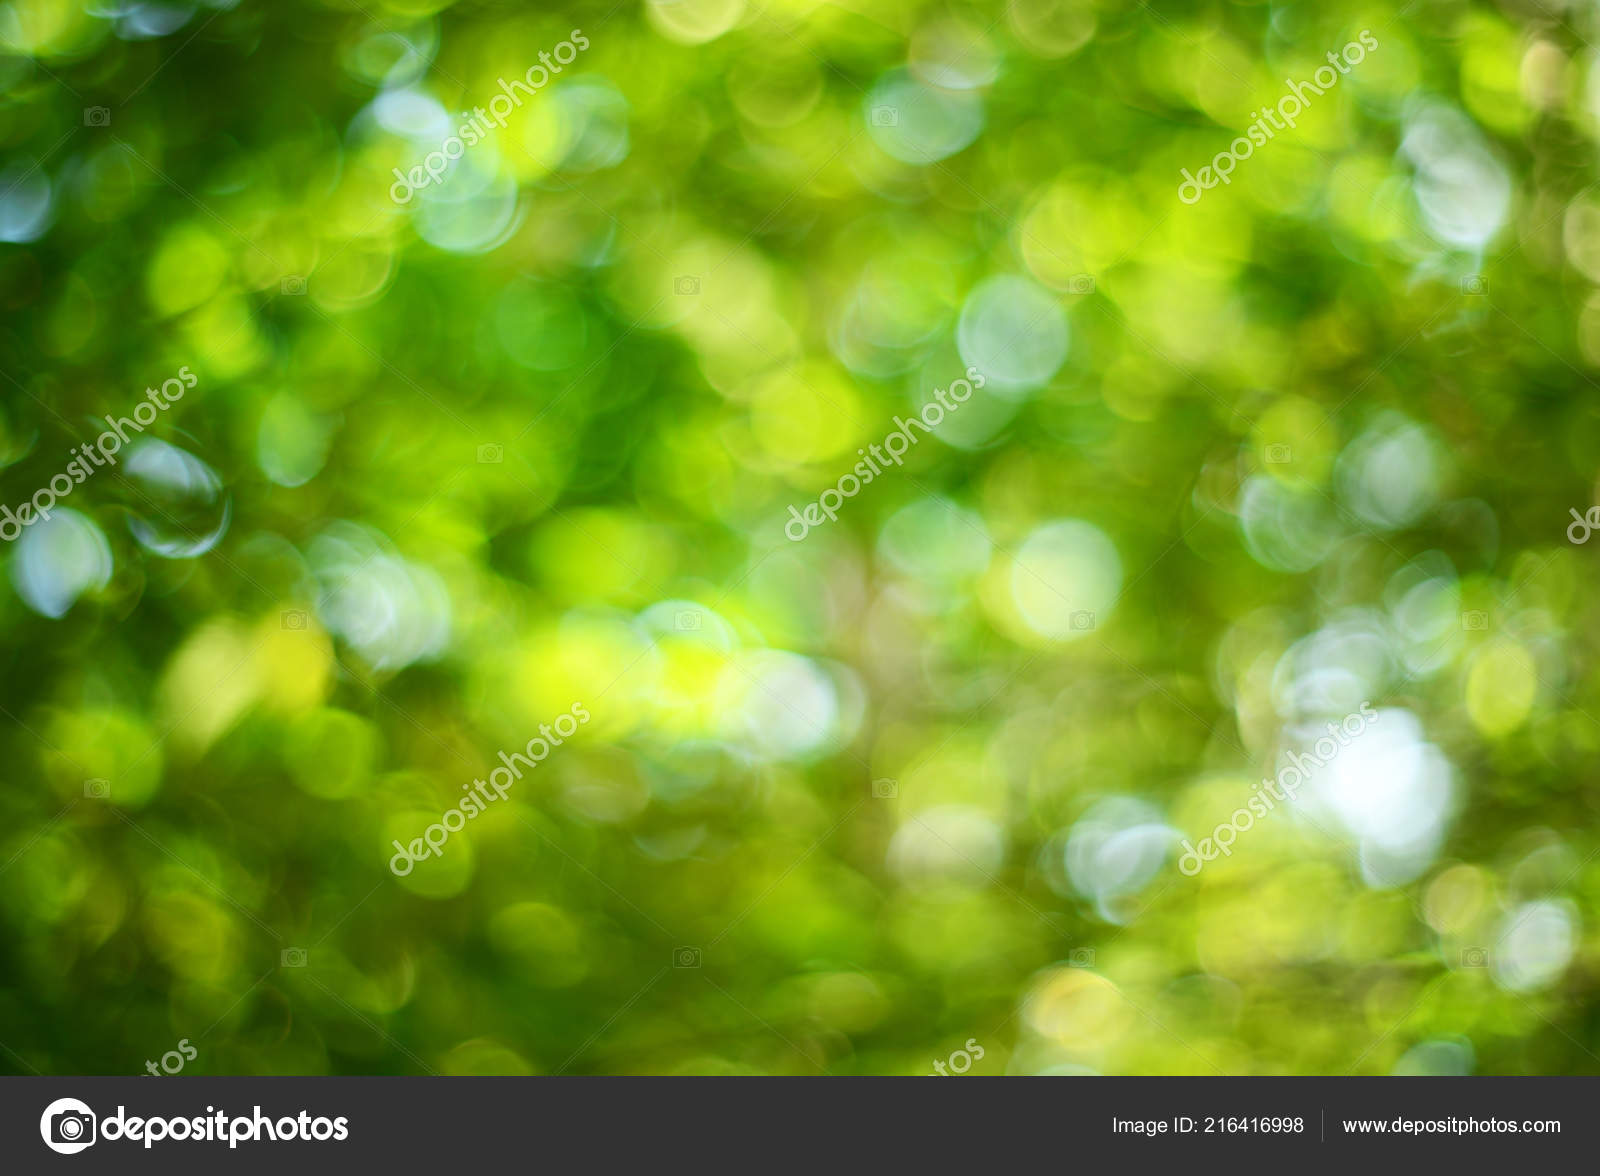 Abstract Green Natural Bokeh Background Stock Photo by ©kwasny222 216416998